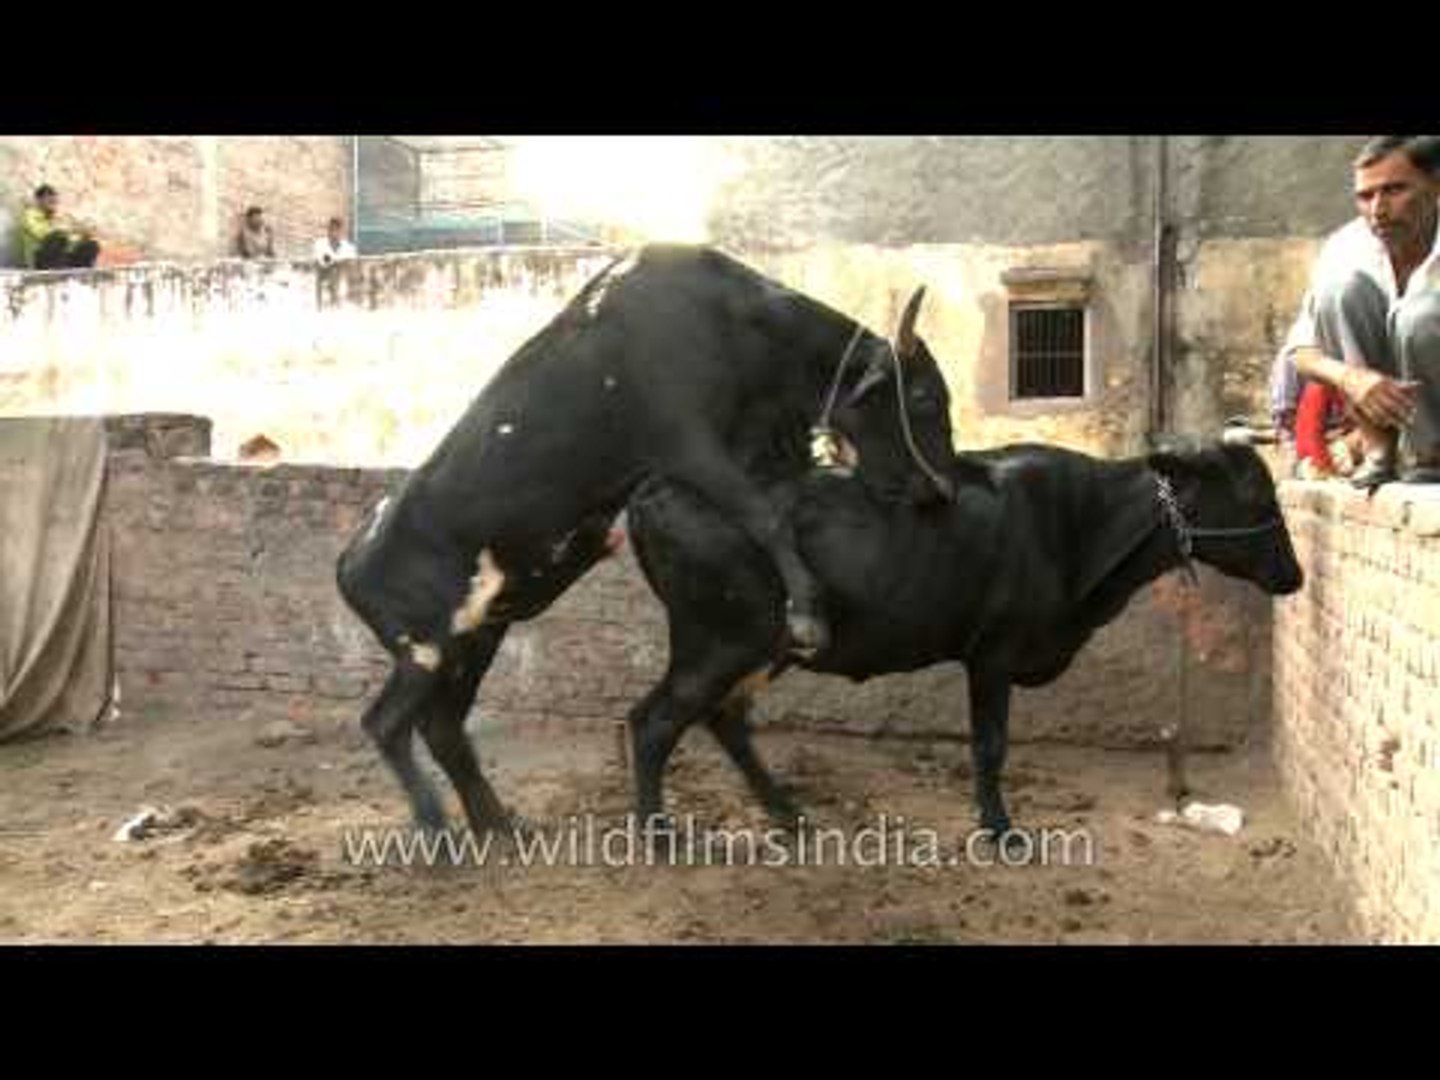 Cow And Bull Xnxx - Black Cows mating in India - video Dailymotion